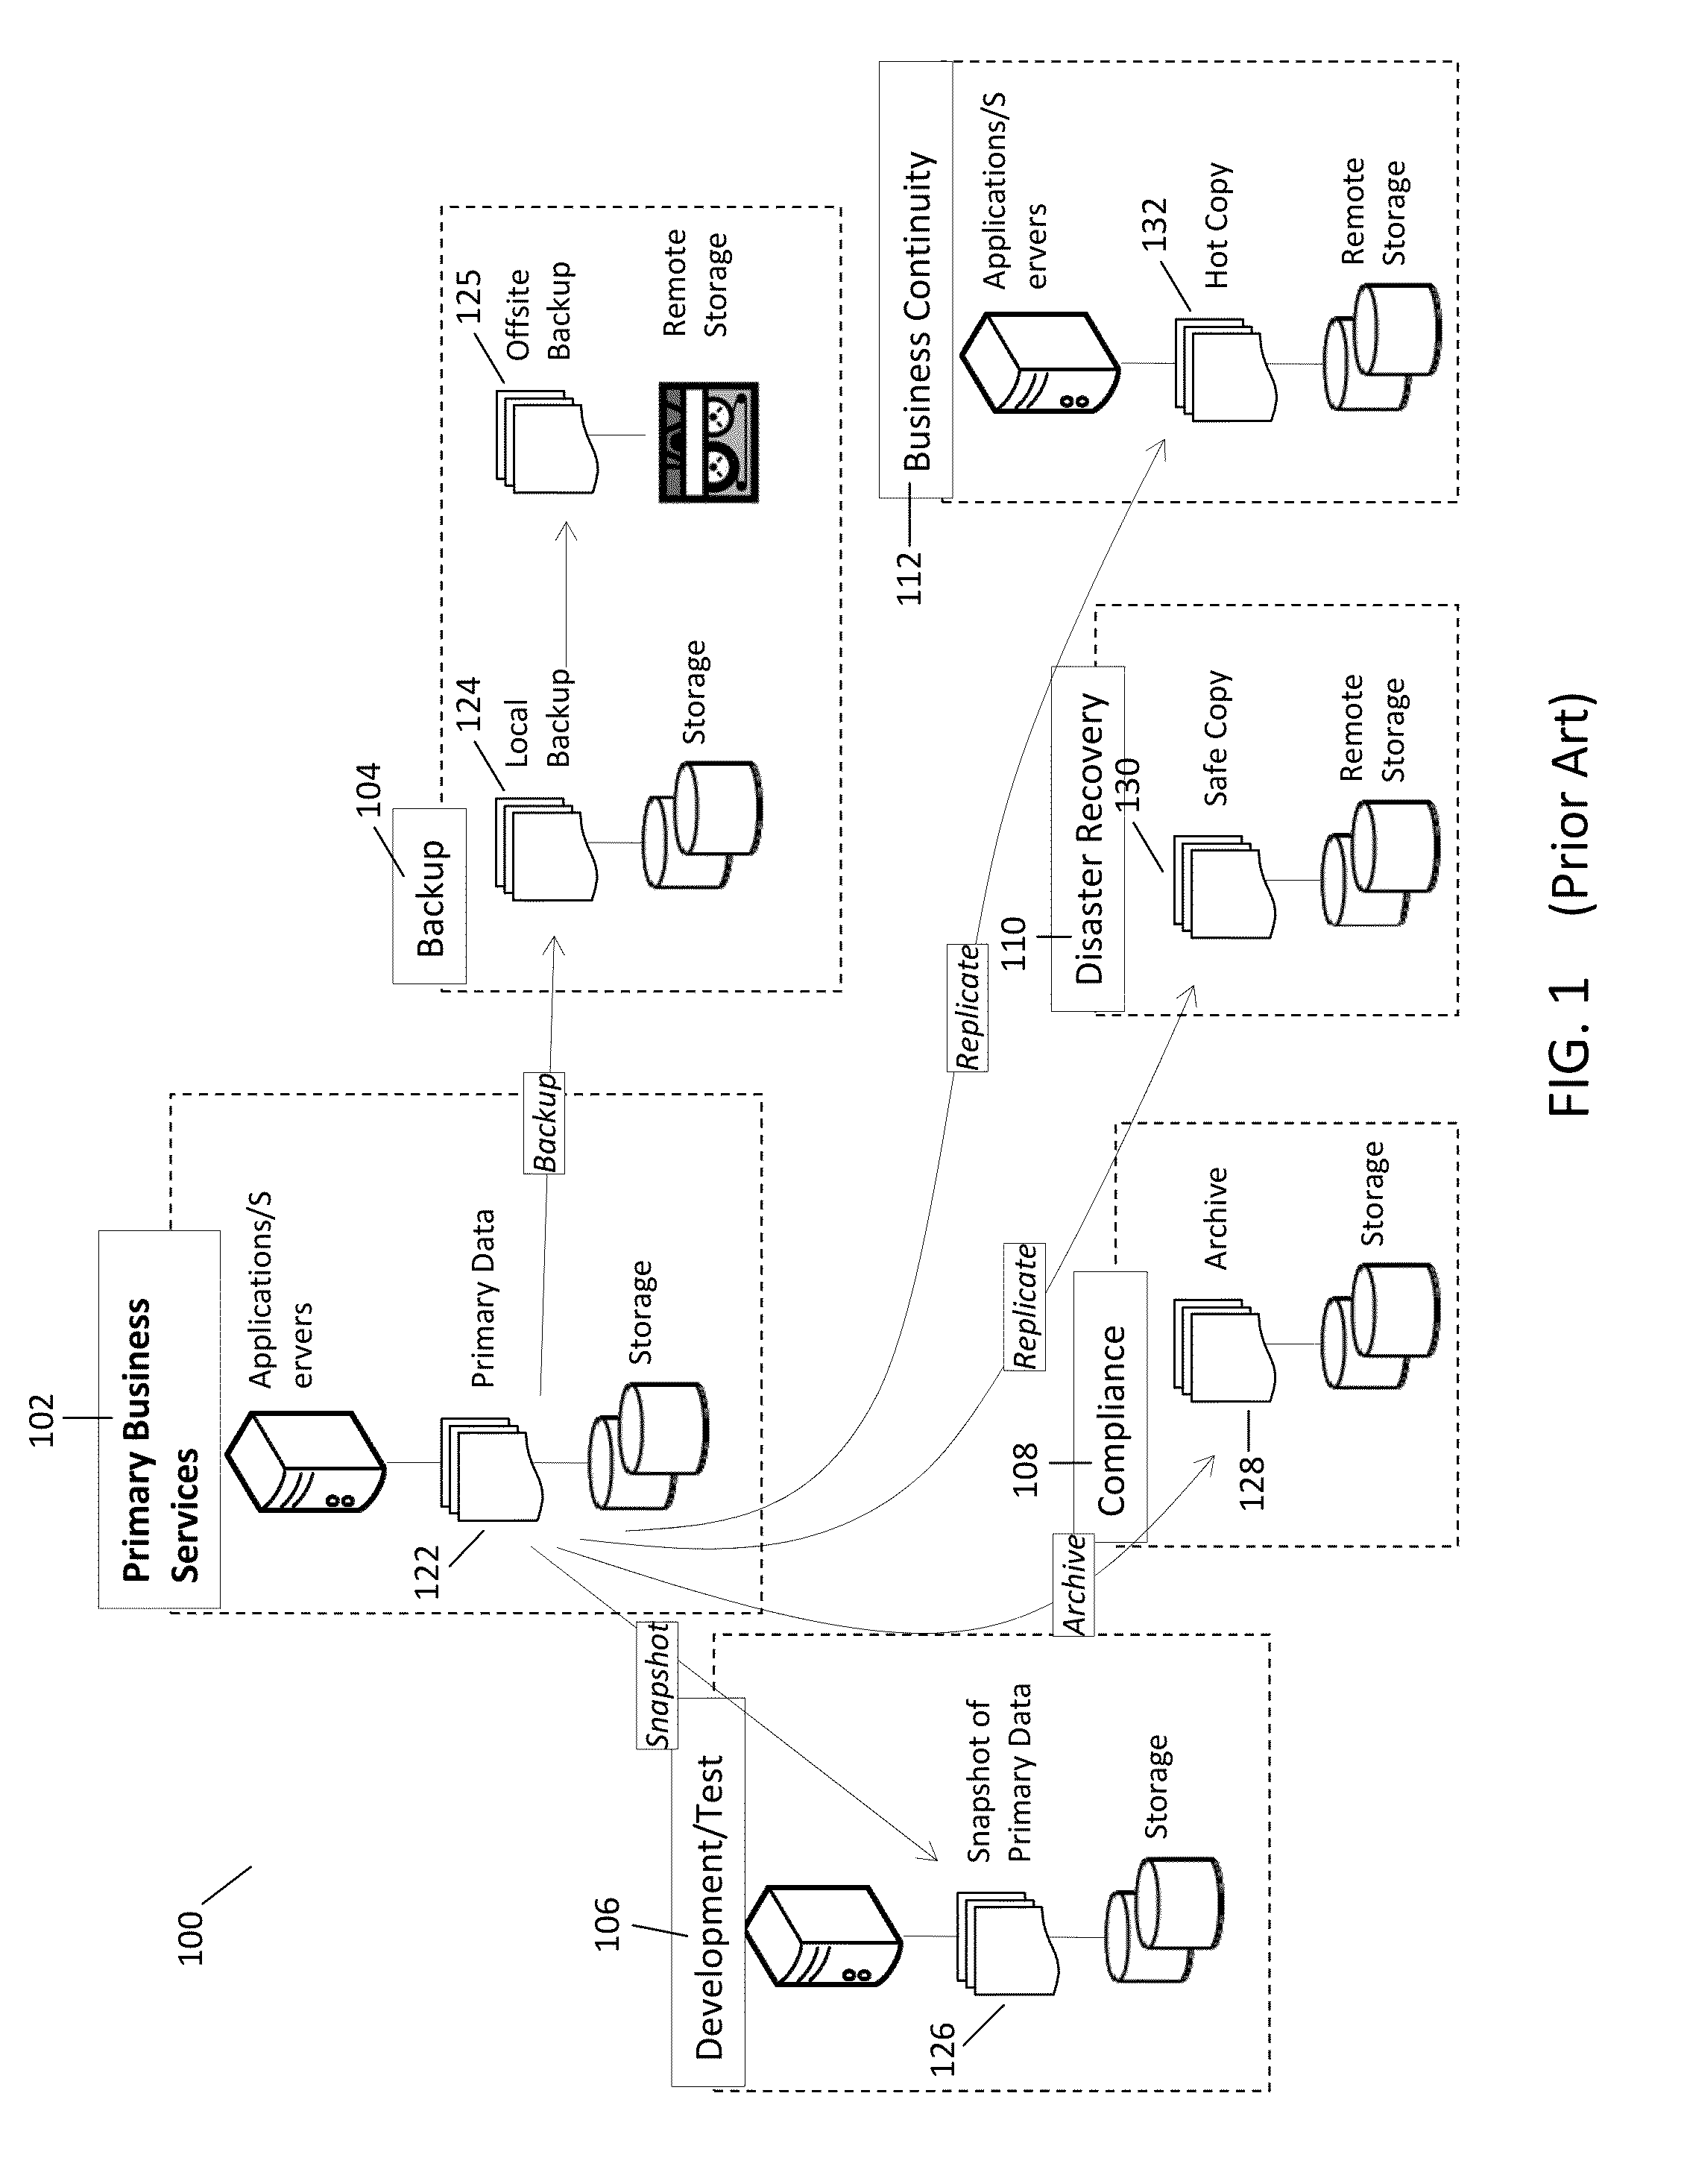 System and method for creating deduplicated copies of data by sending difference data between near-neighbor temporal states